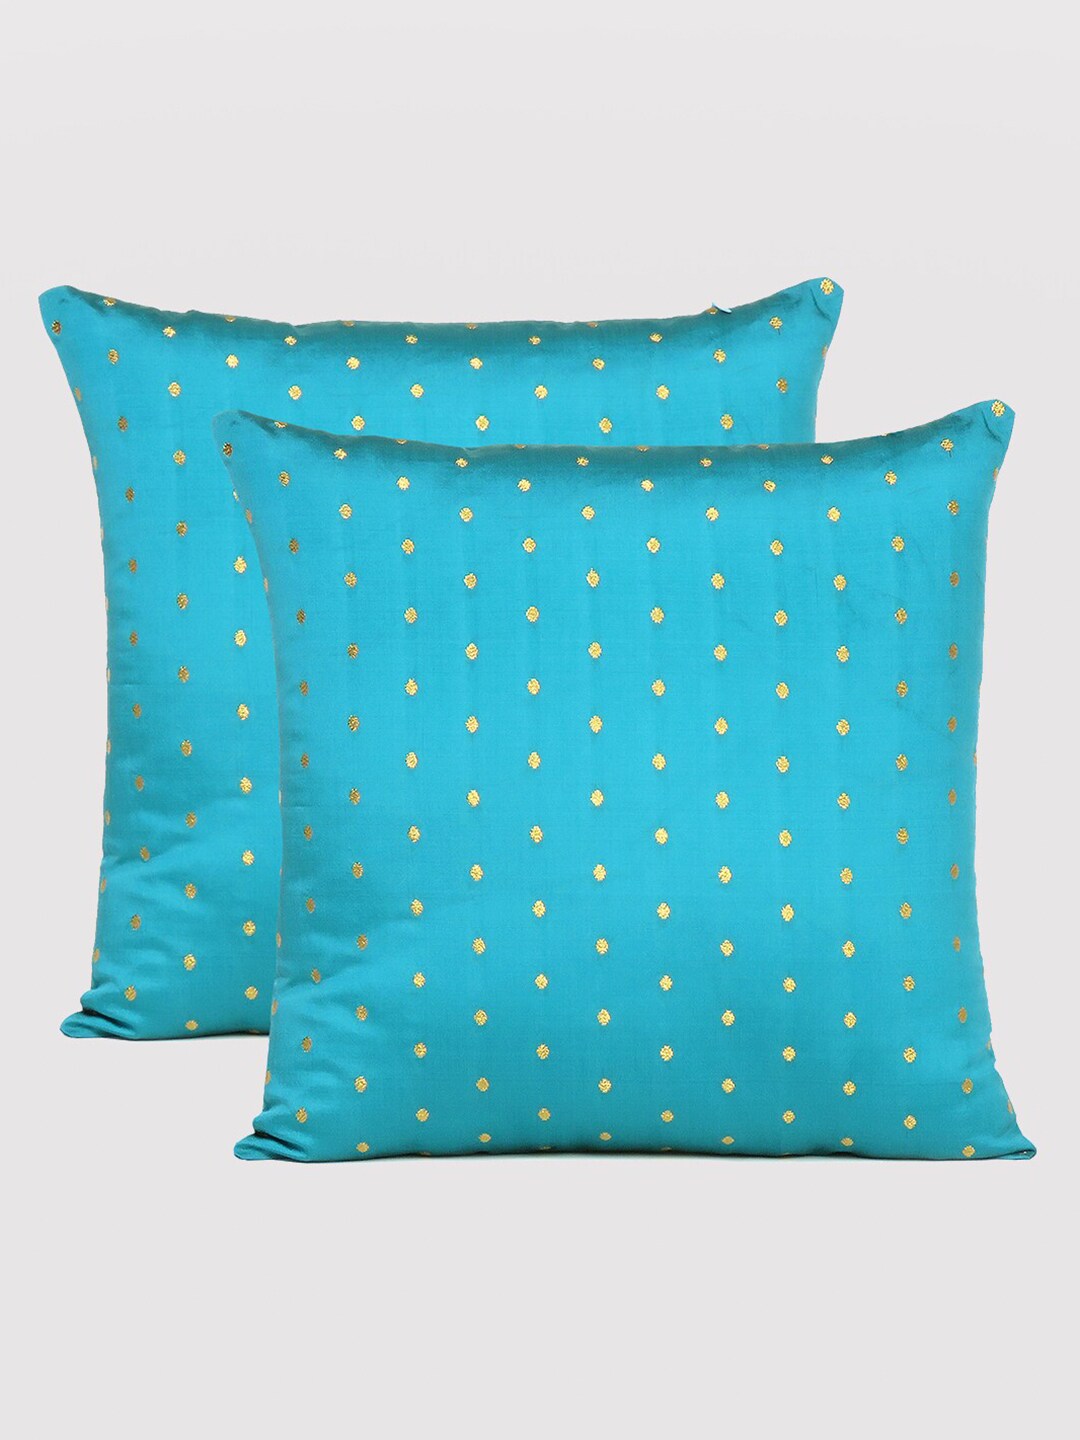 OUSSUM Blue & Gold-Toned Set of 2 Geometric Square Cushion Covers Price in India